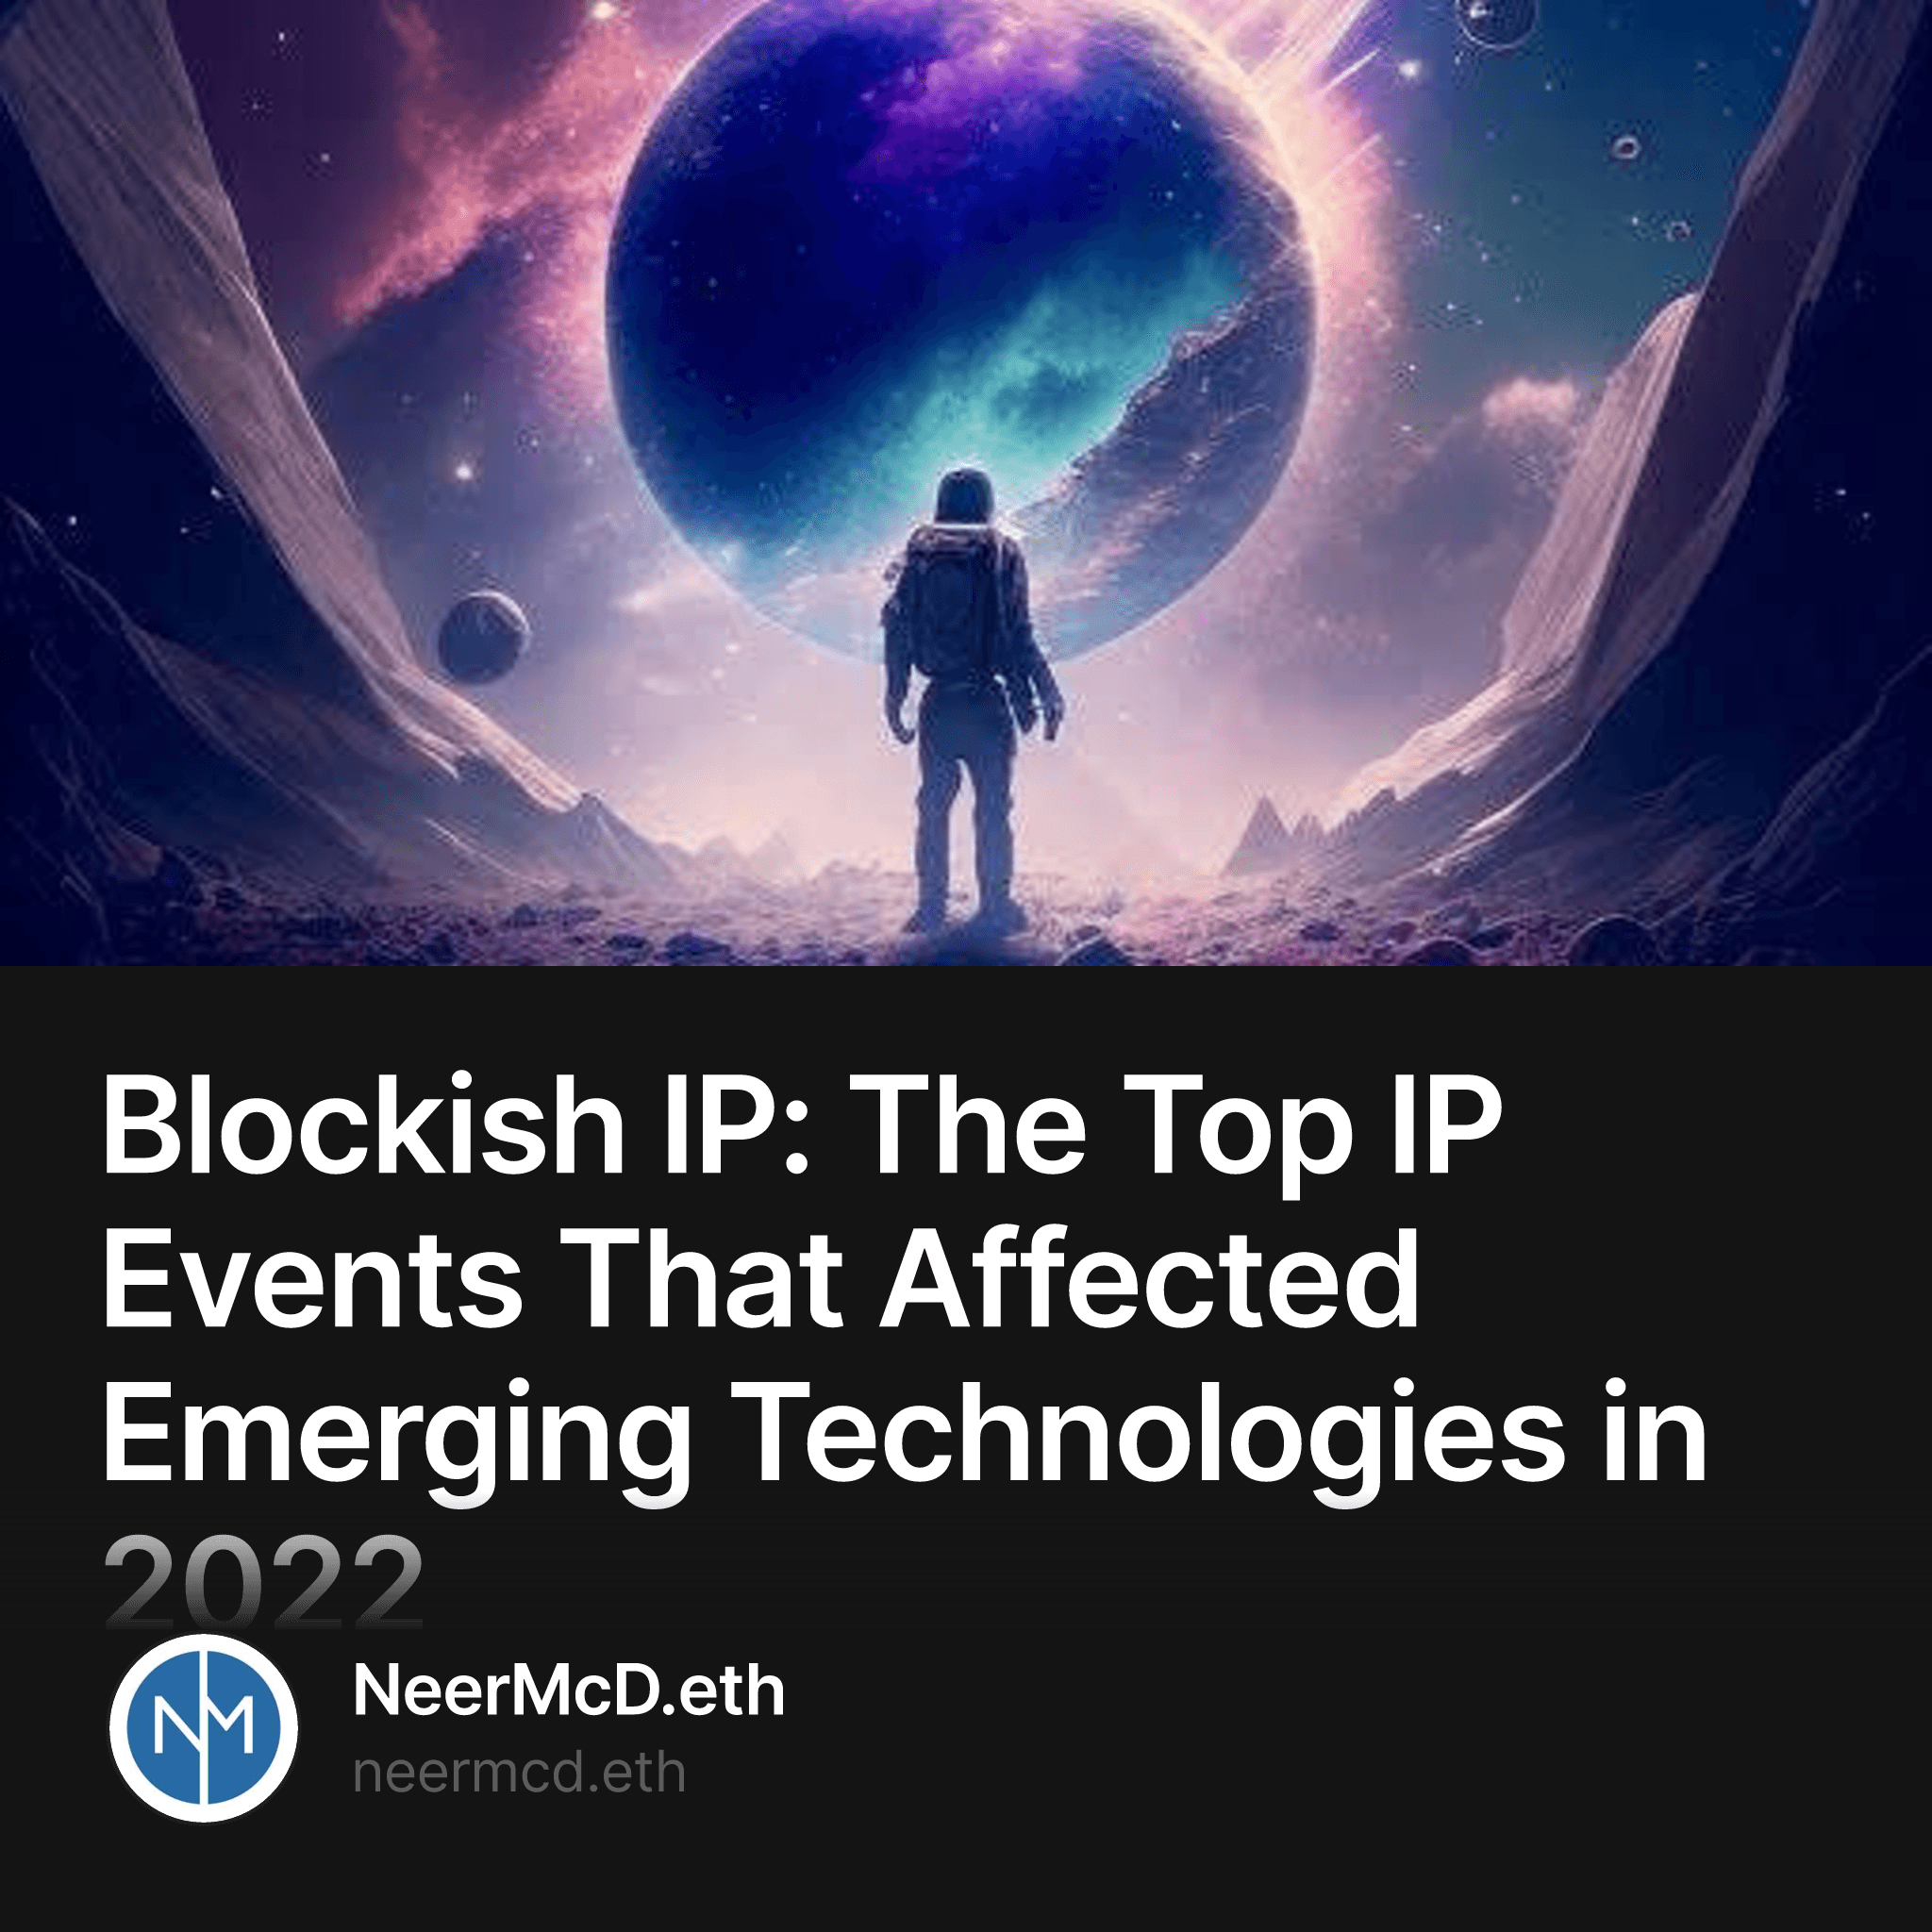 Blockish IP: The Top IP Events That Affected Emerging Technologies in 2022 1/500